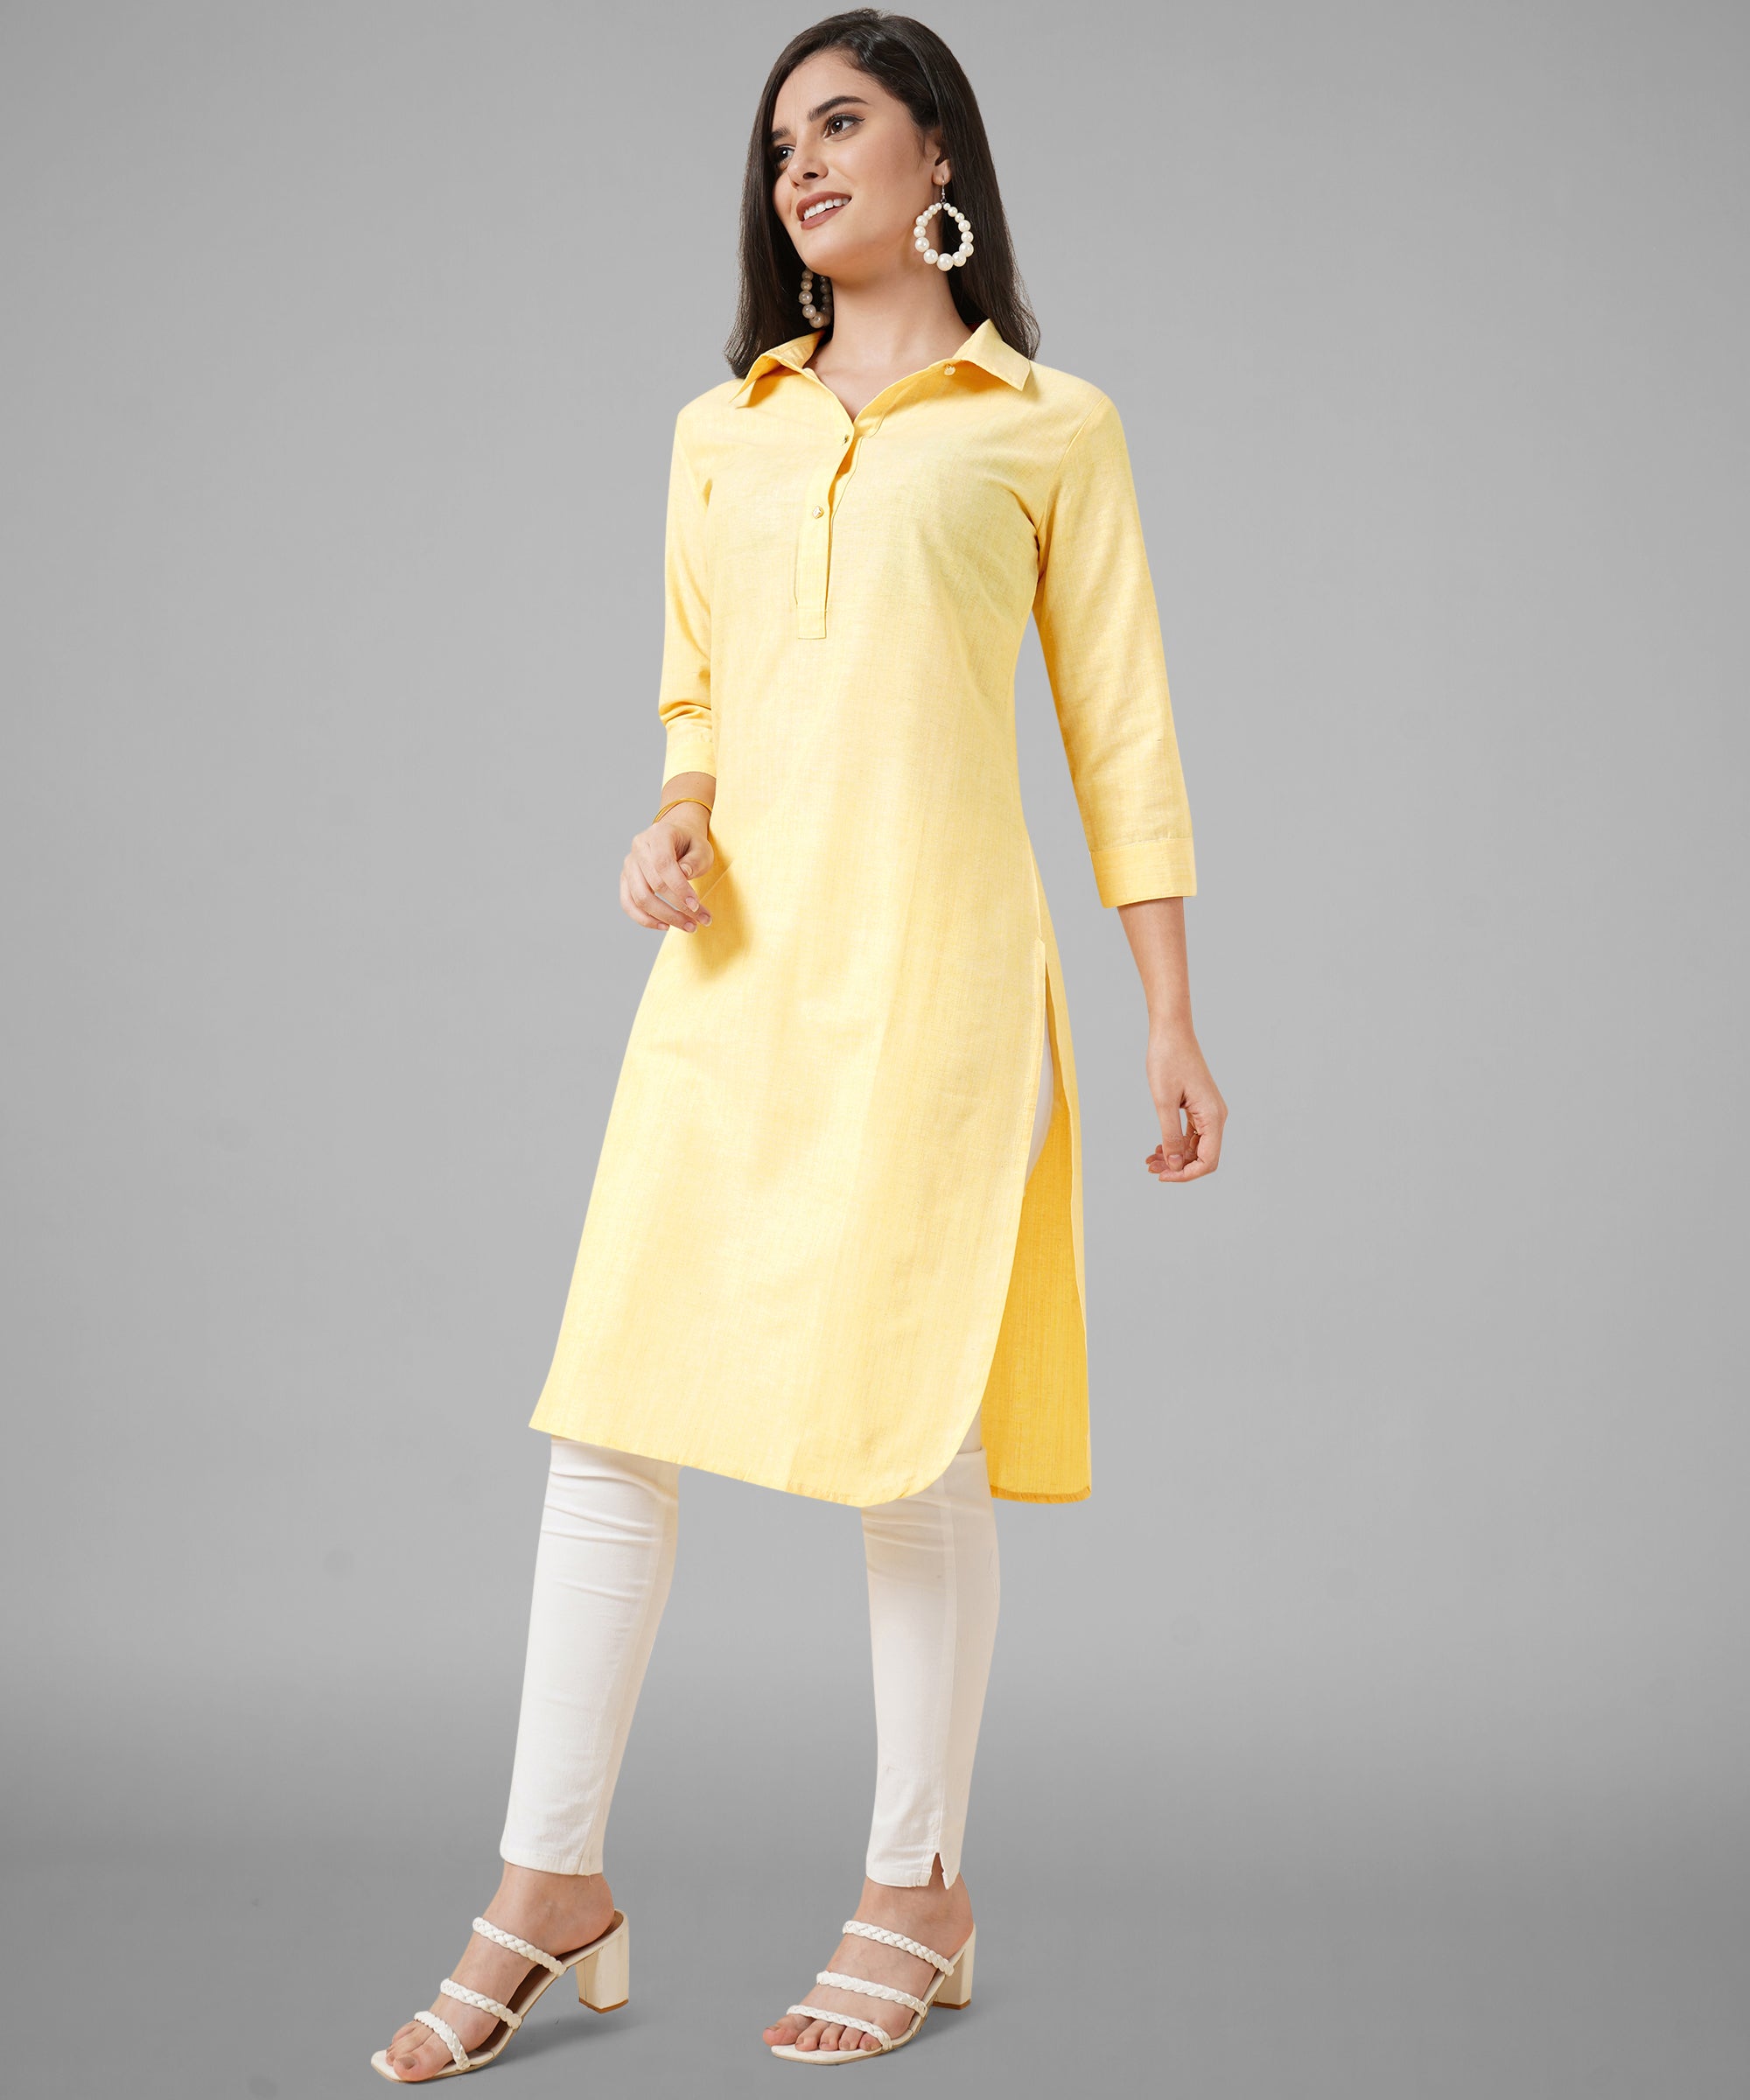 Buy Cotton Kurti Front Plates & Button Button Design with neck pendant  (YELLOW) at Amazon.in